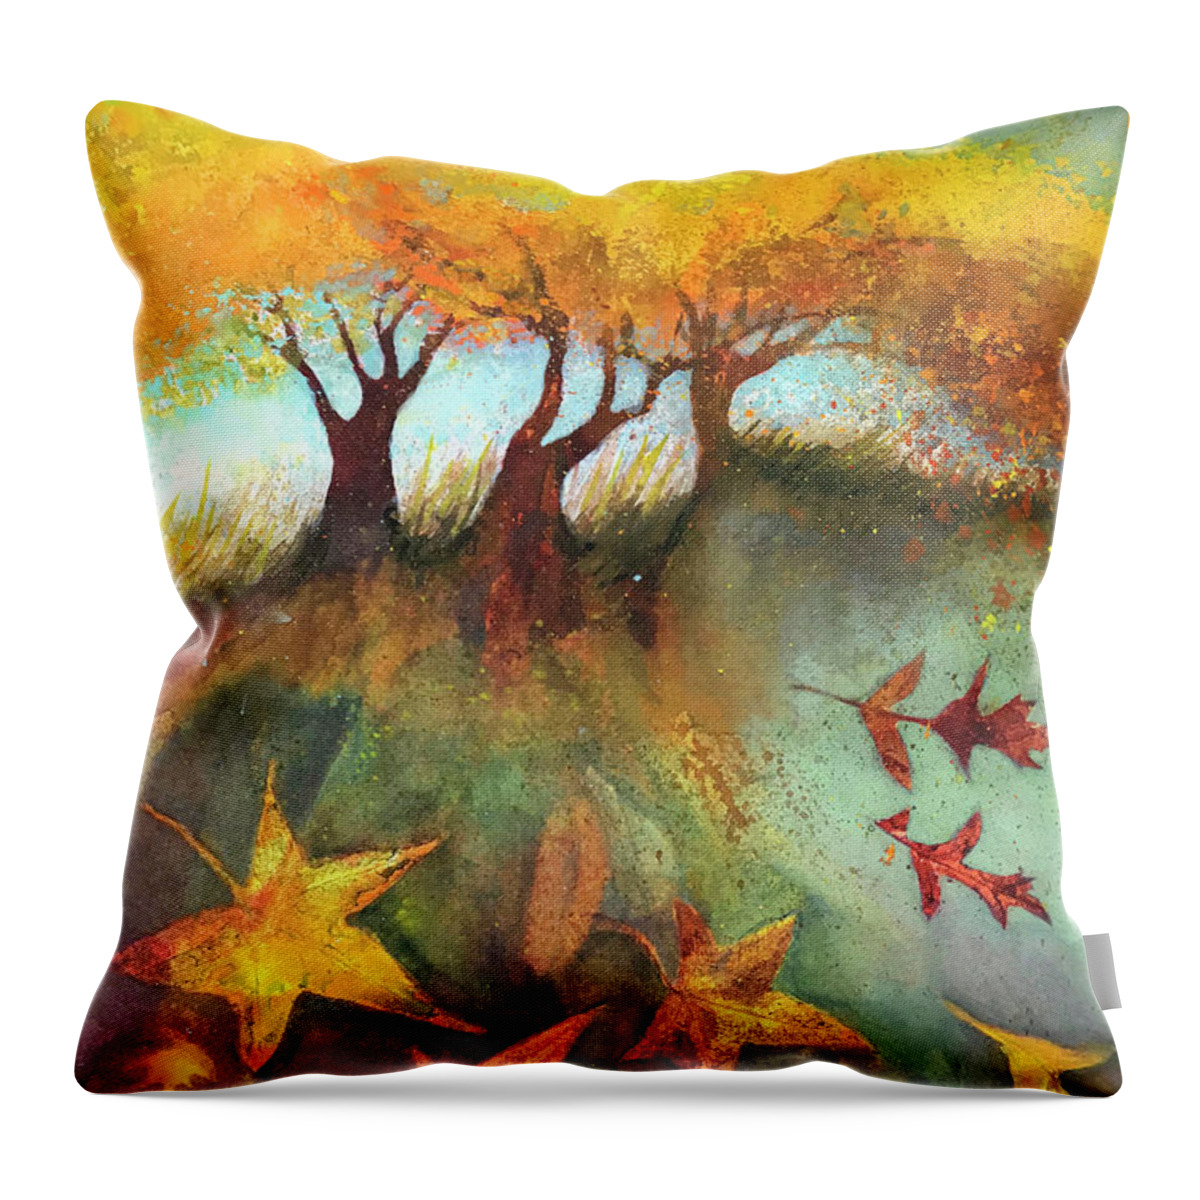 Mixed Media Watercolor Throw Pillow featuring the painting Fall Gifts by Judy Frisk